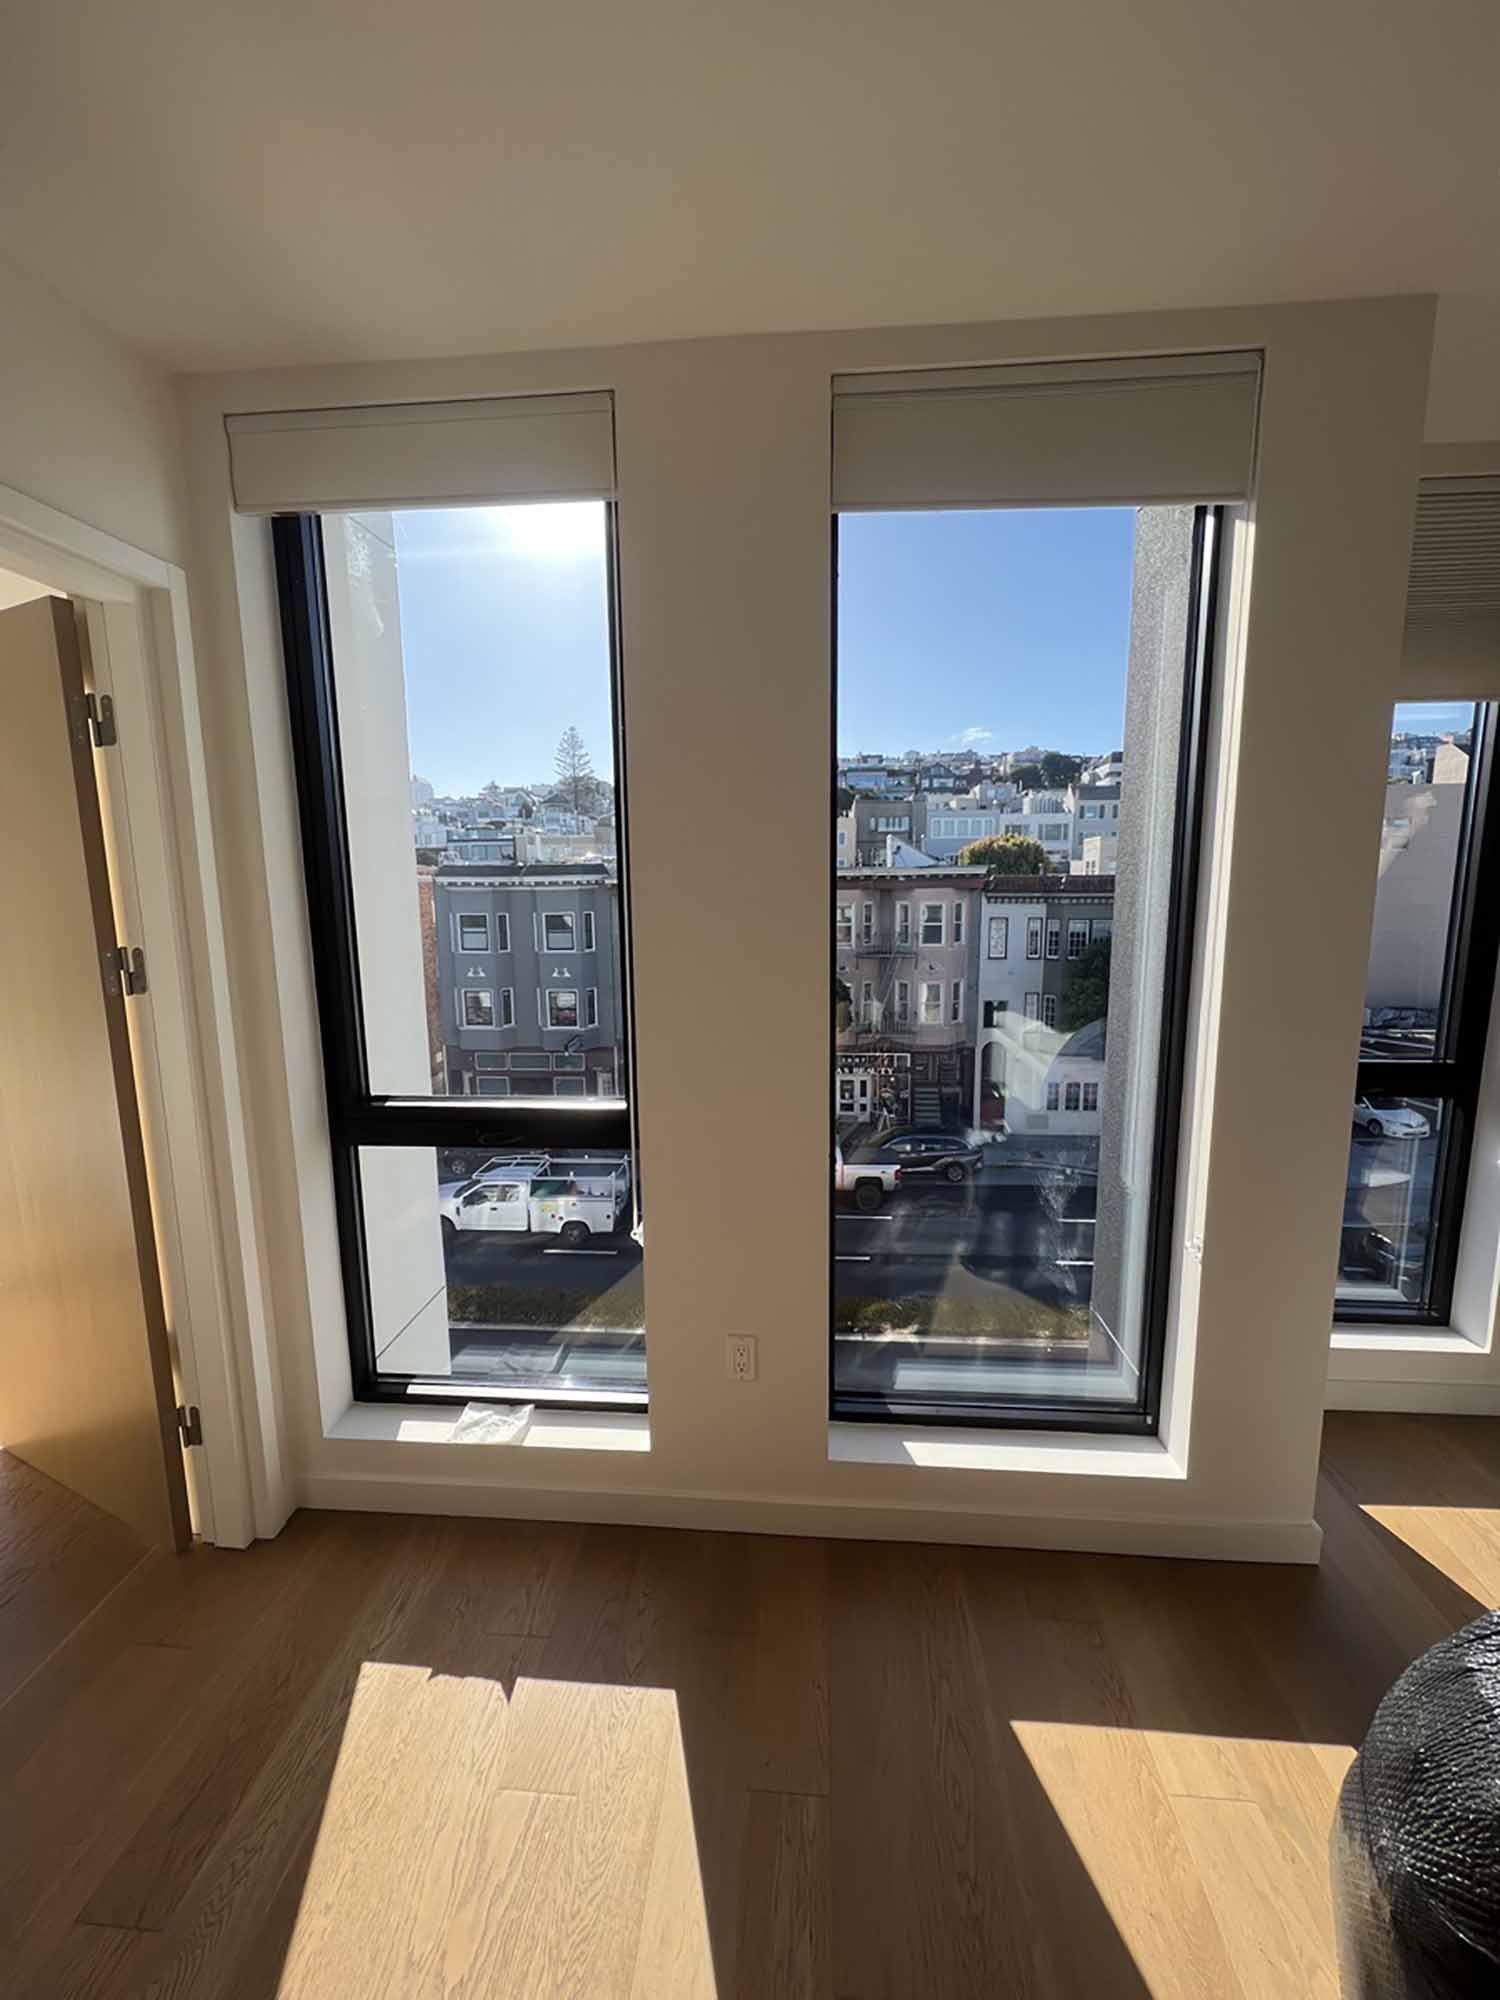 ClimatePro Installs 3M Sun Control Window Film in San Francisco. Get a free installation for your San Francisco Bay Area home.